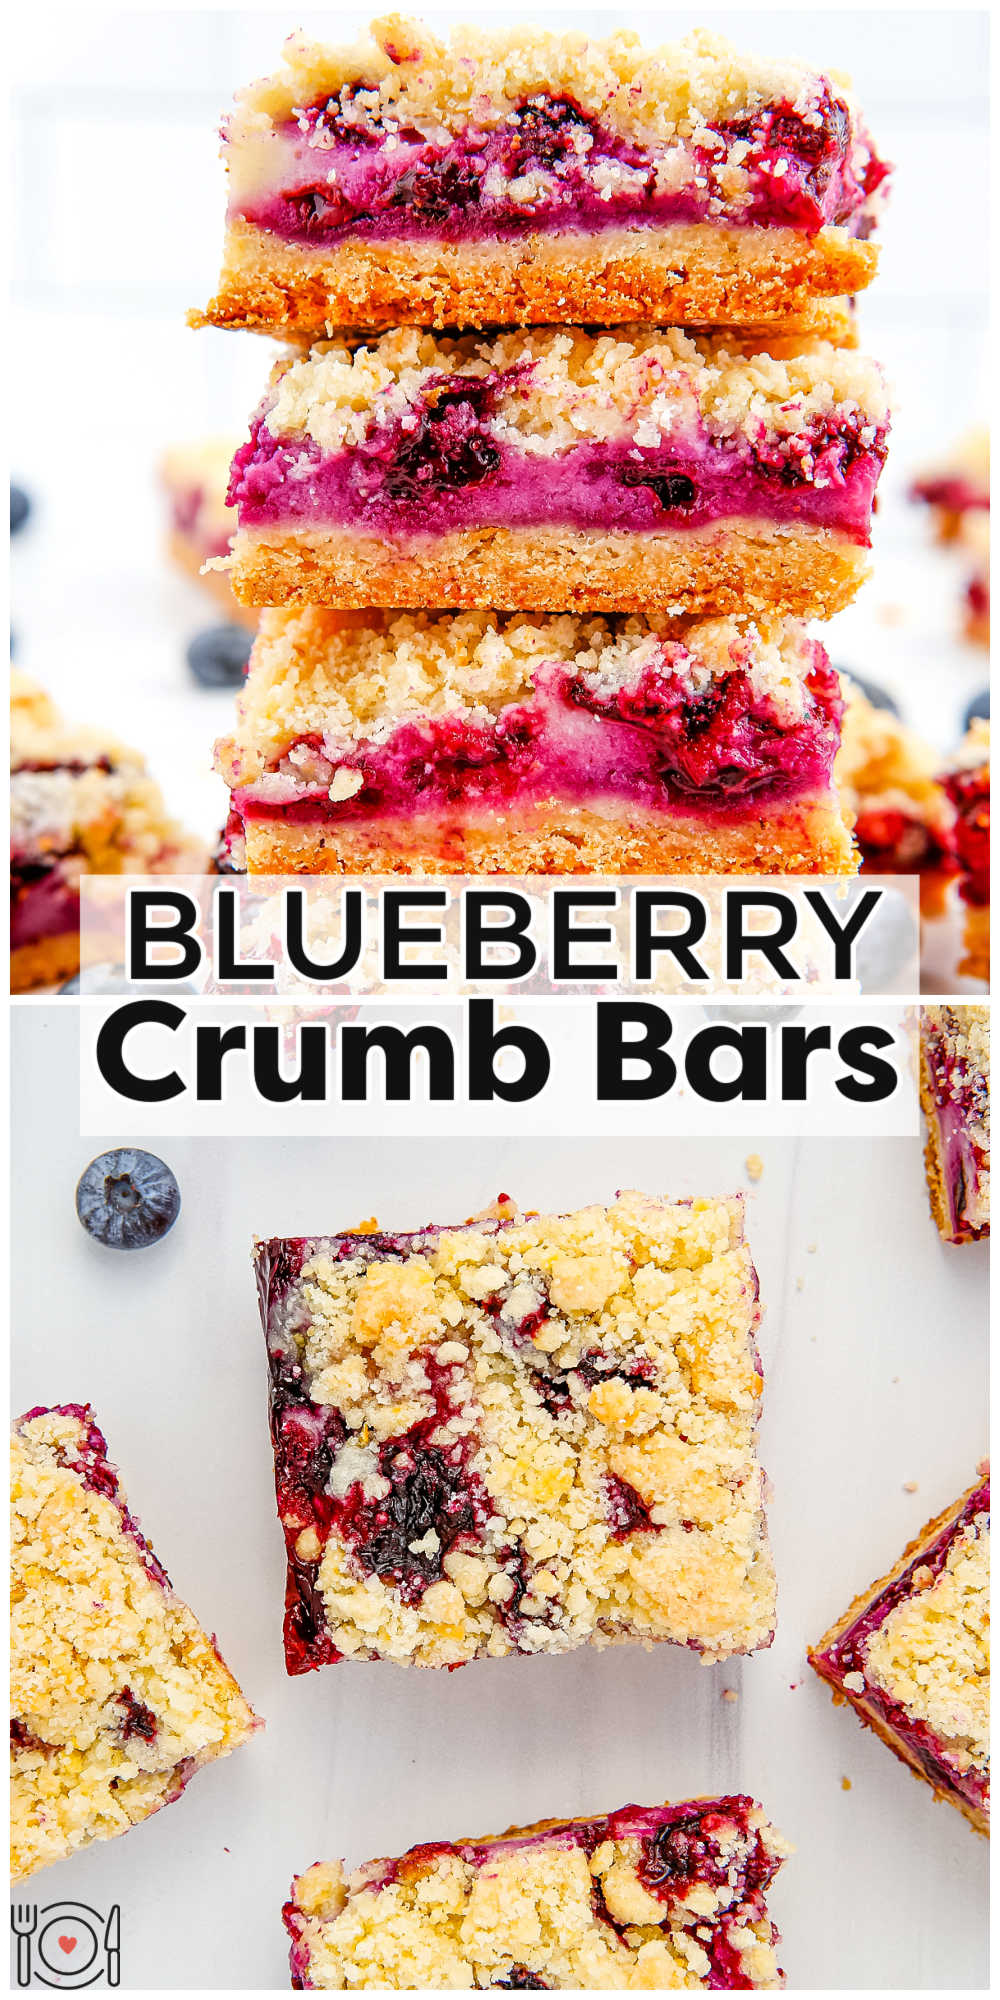 Blueberry Crumb Bars are just the thing for using up fresh, in-season blueberries! They have a buttery lemon and ginger-infused crumble topping and crust.  via @foodfolksandfun